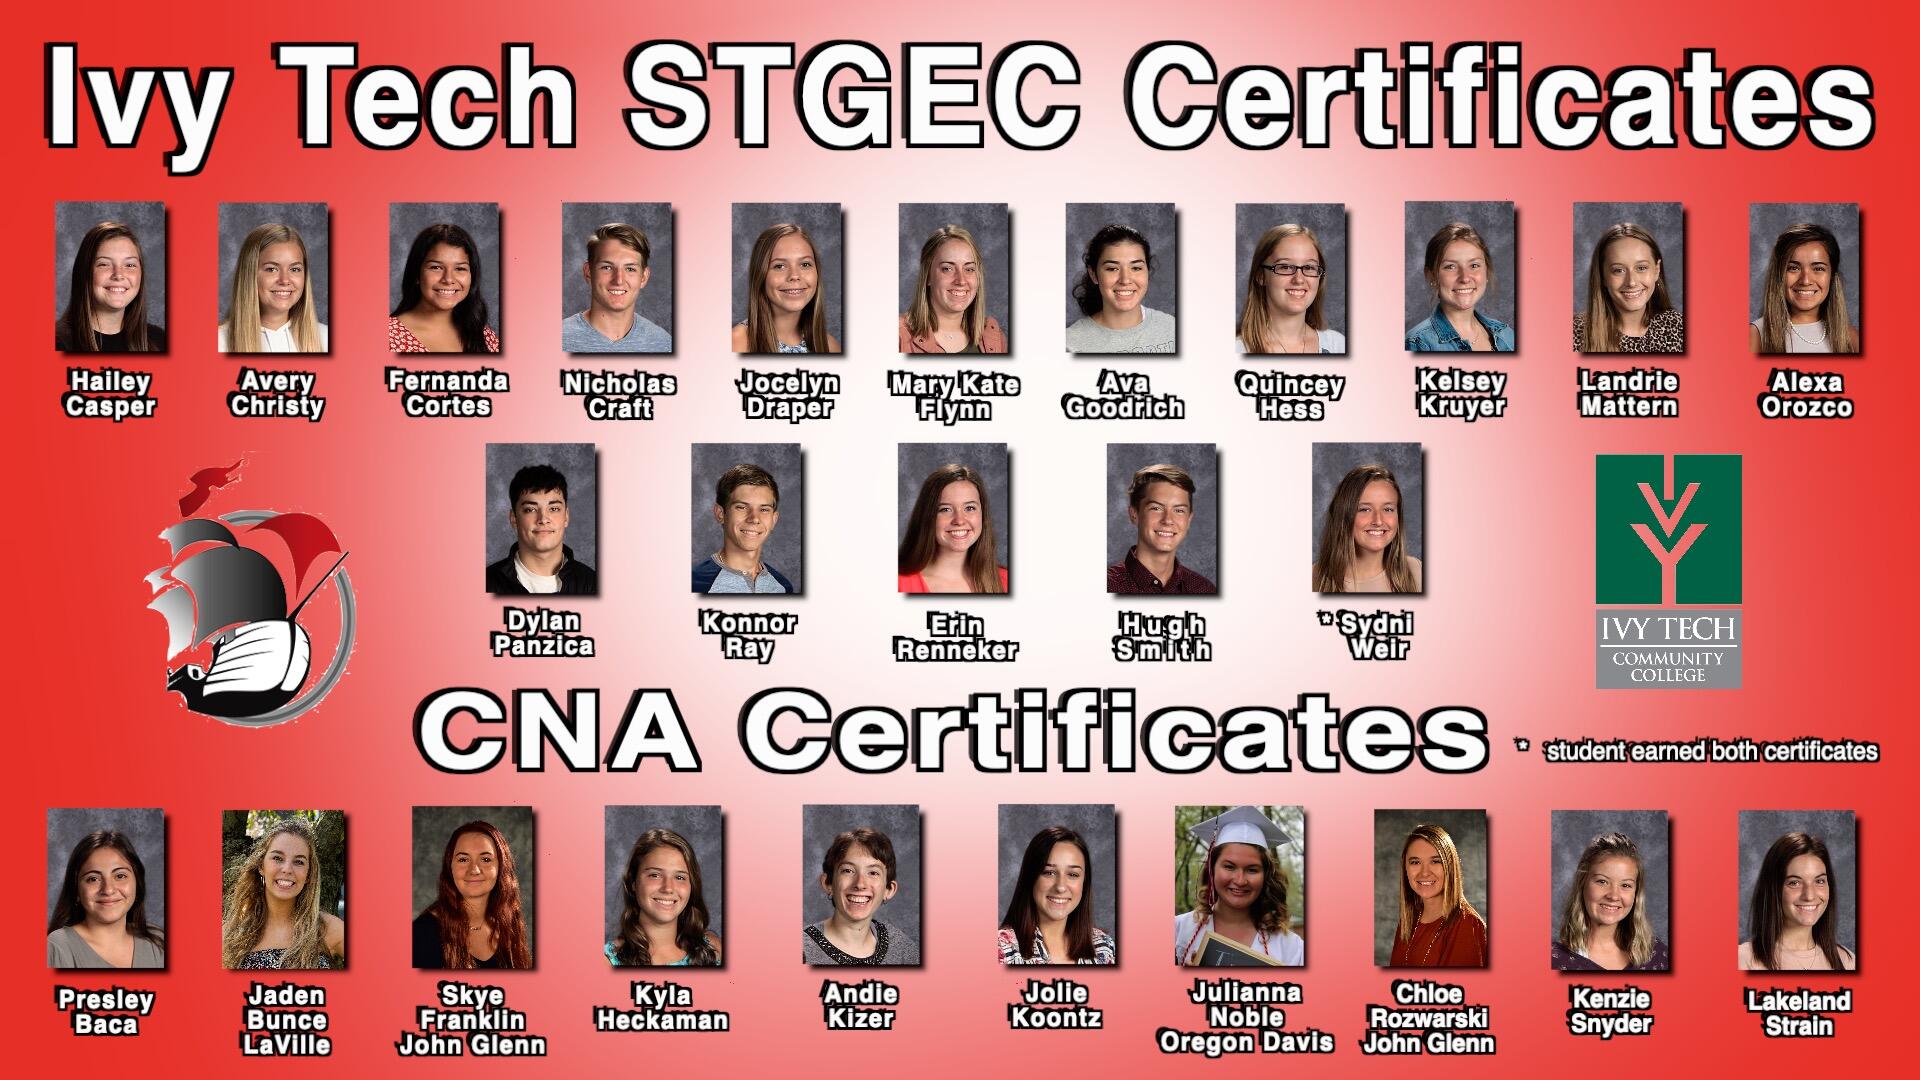 Ivy Tech Certificates STGEC-CNA Certificates from Ivy Tech with photos